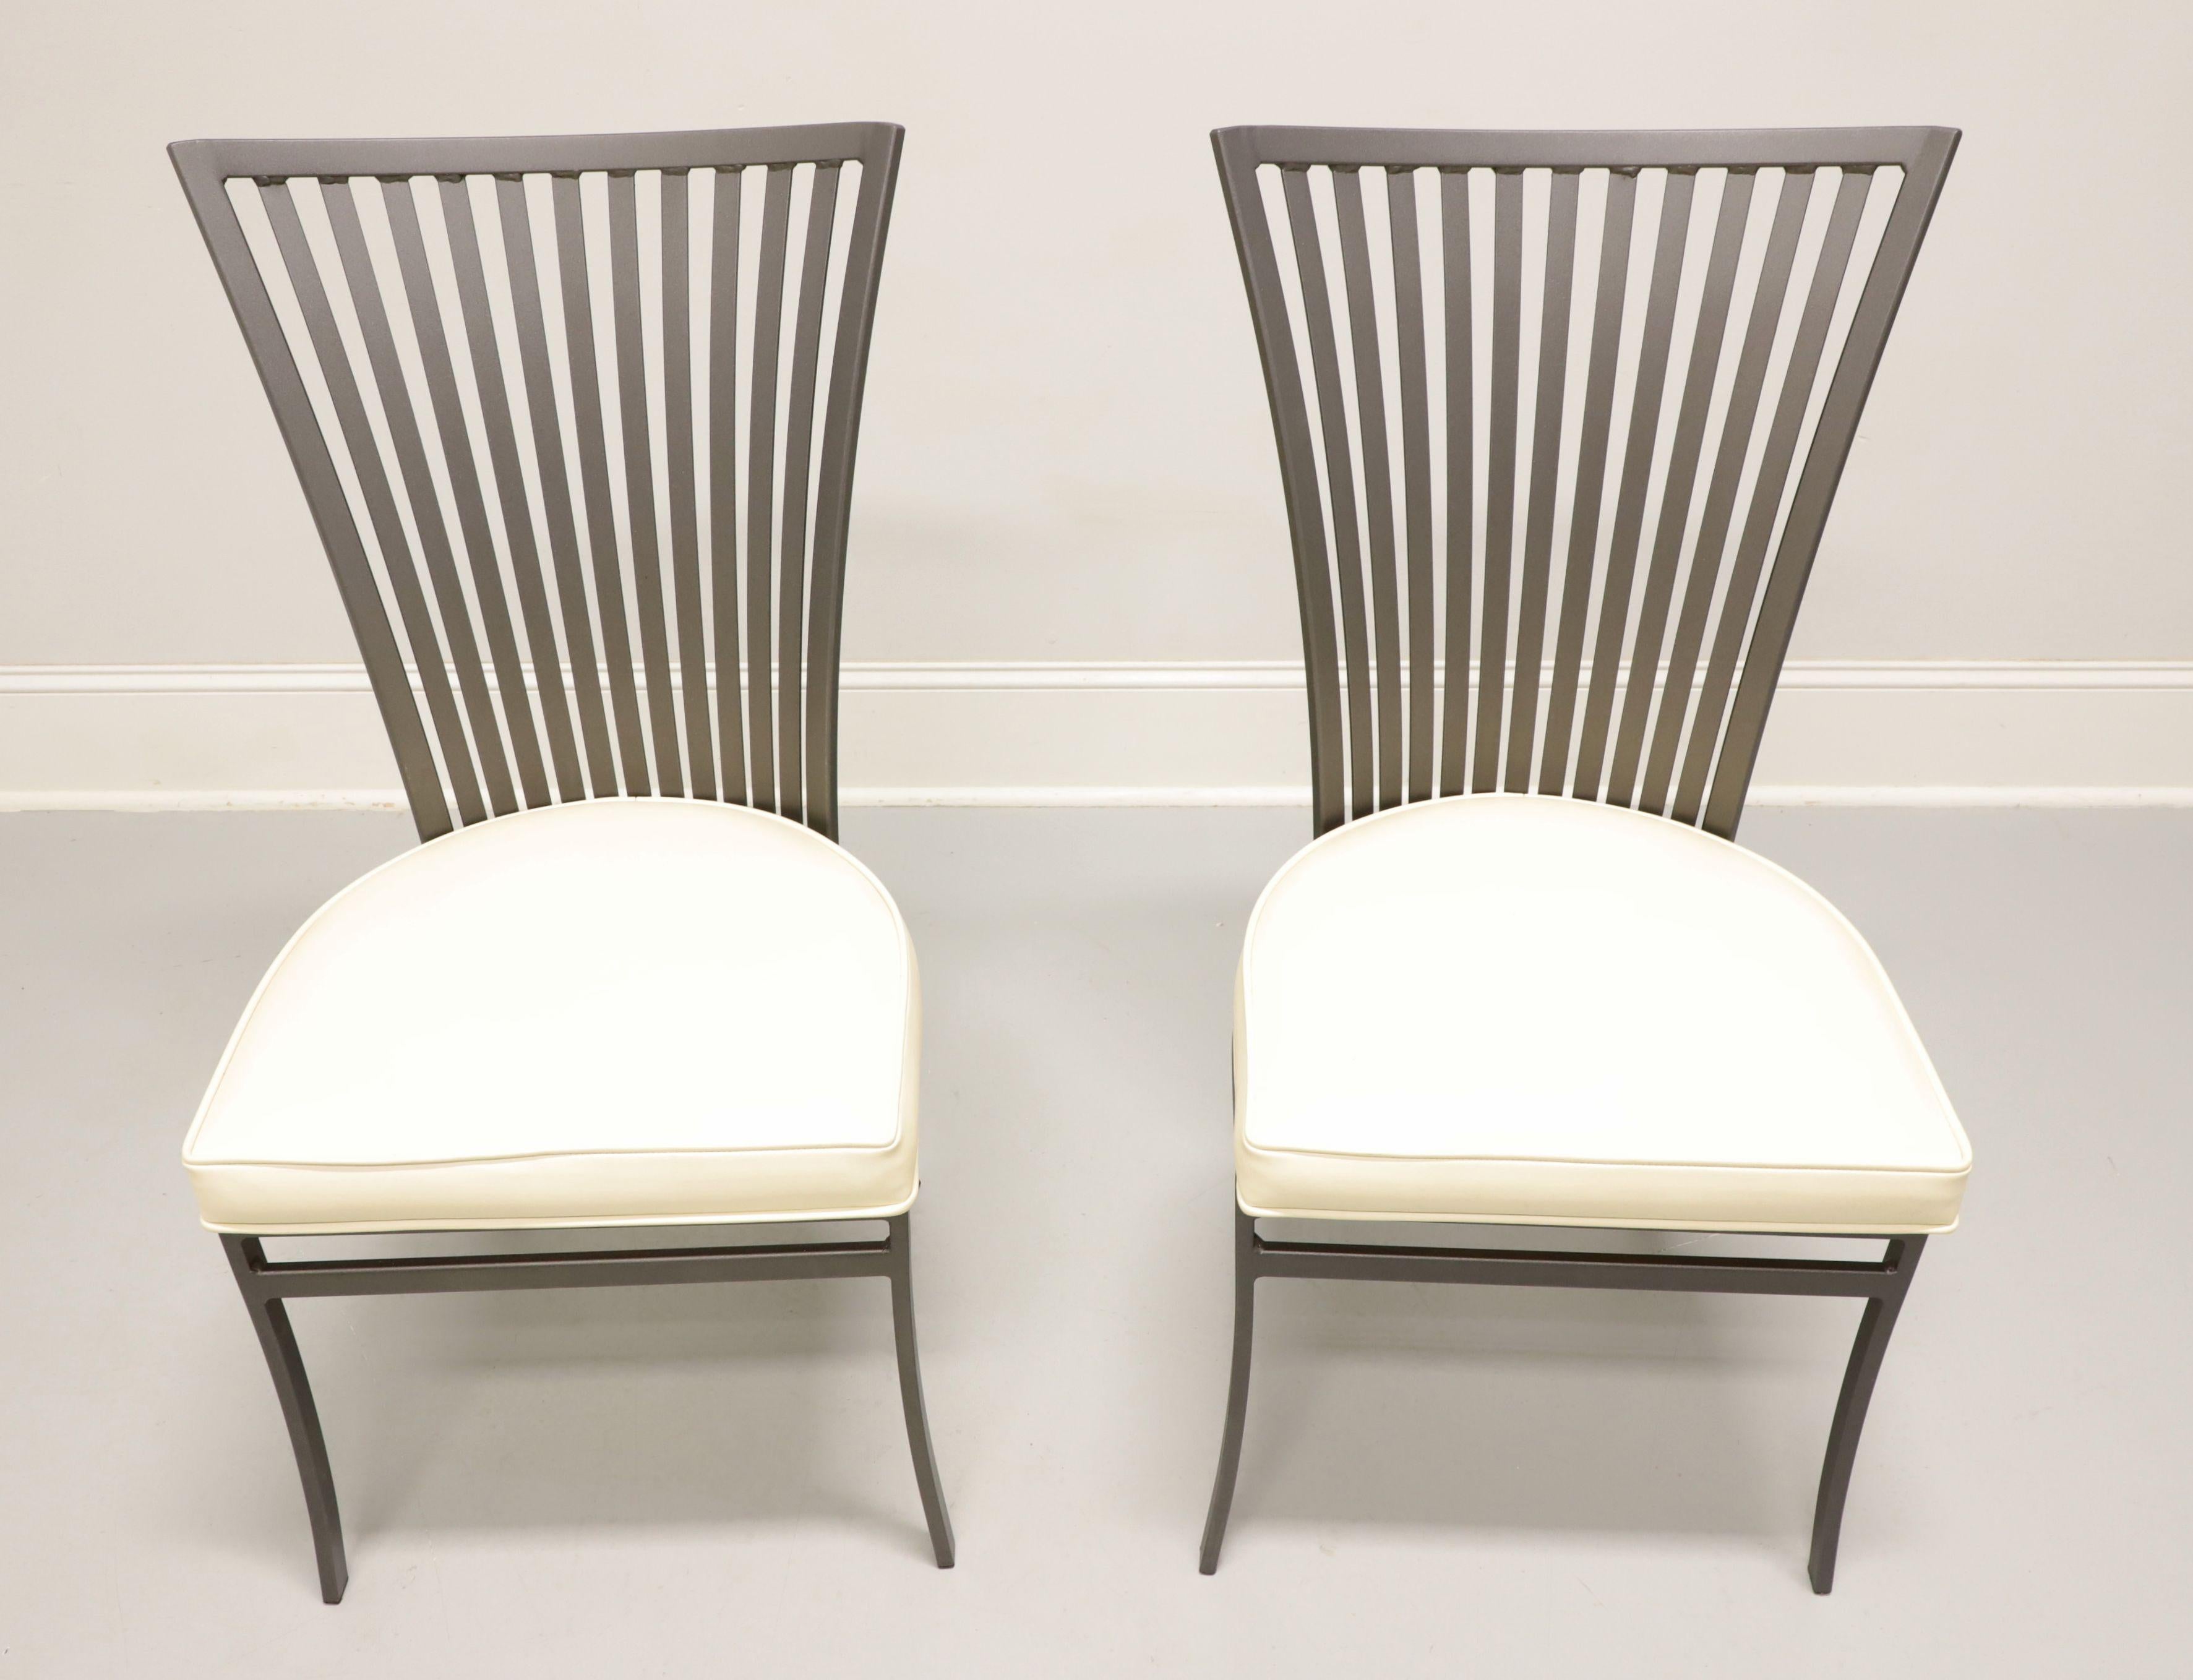 A pair of Mid 20th Century Modern style steel patio side chairs designed by Arthur Umanoff for Shaver-Howard. Steel metal frame, grey color finish, flared backrest with straight crestrail & spindles, white vinyl upholstered seat, open apron, and